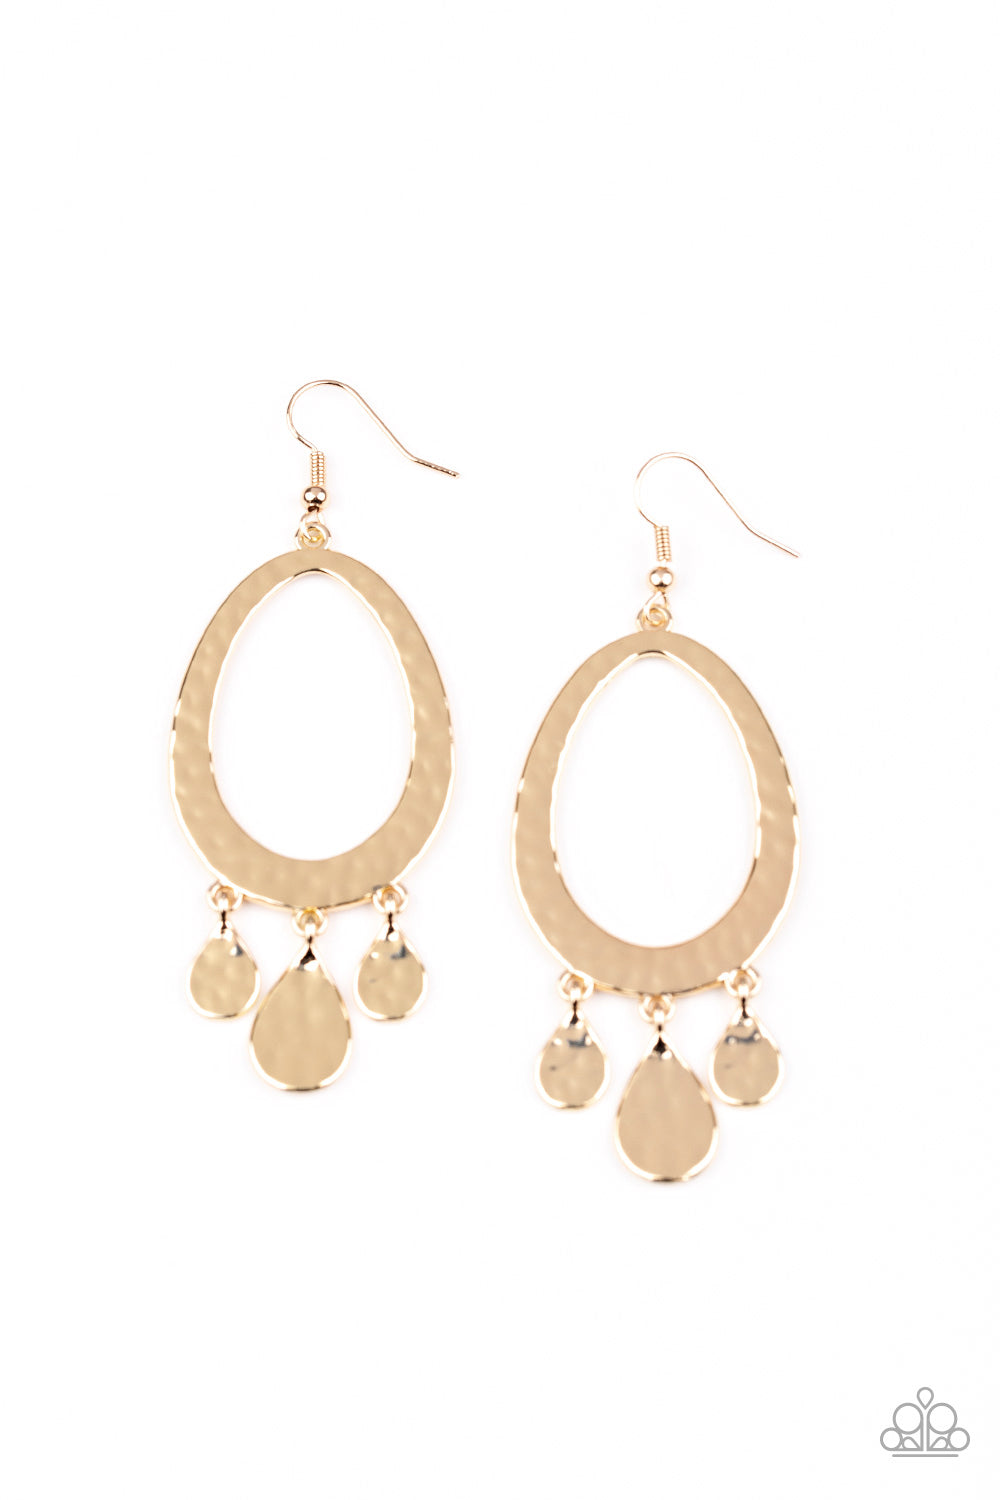 pittmanbling-and-jewelry-inc-presentstaboo-trinket-gold-earrings-paparazzi-accessories